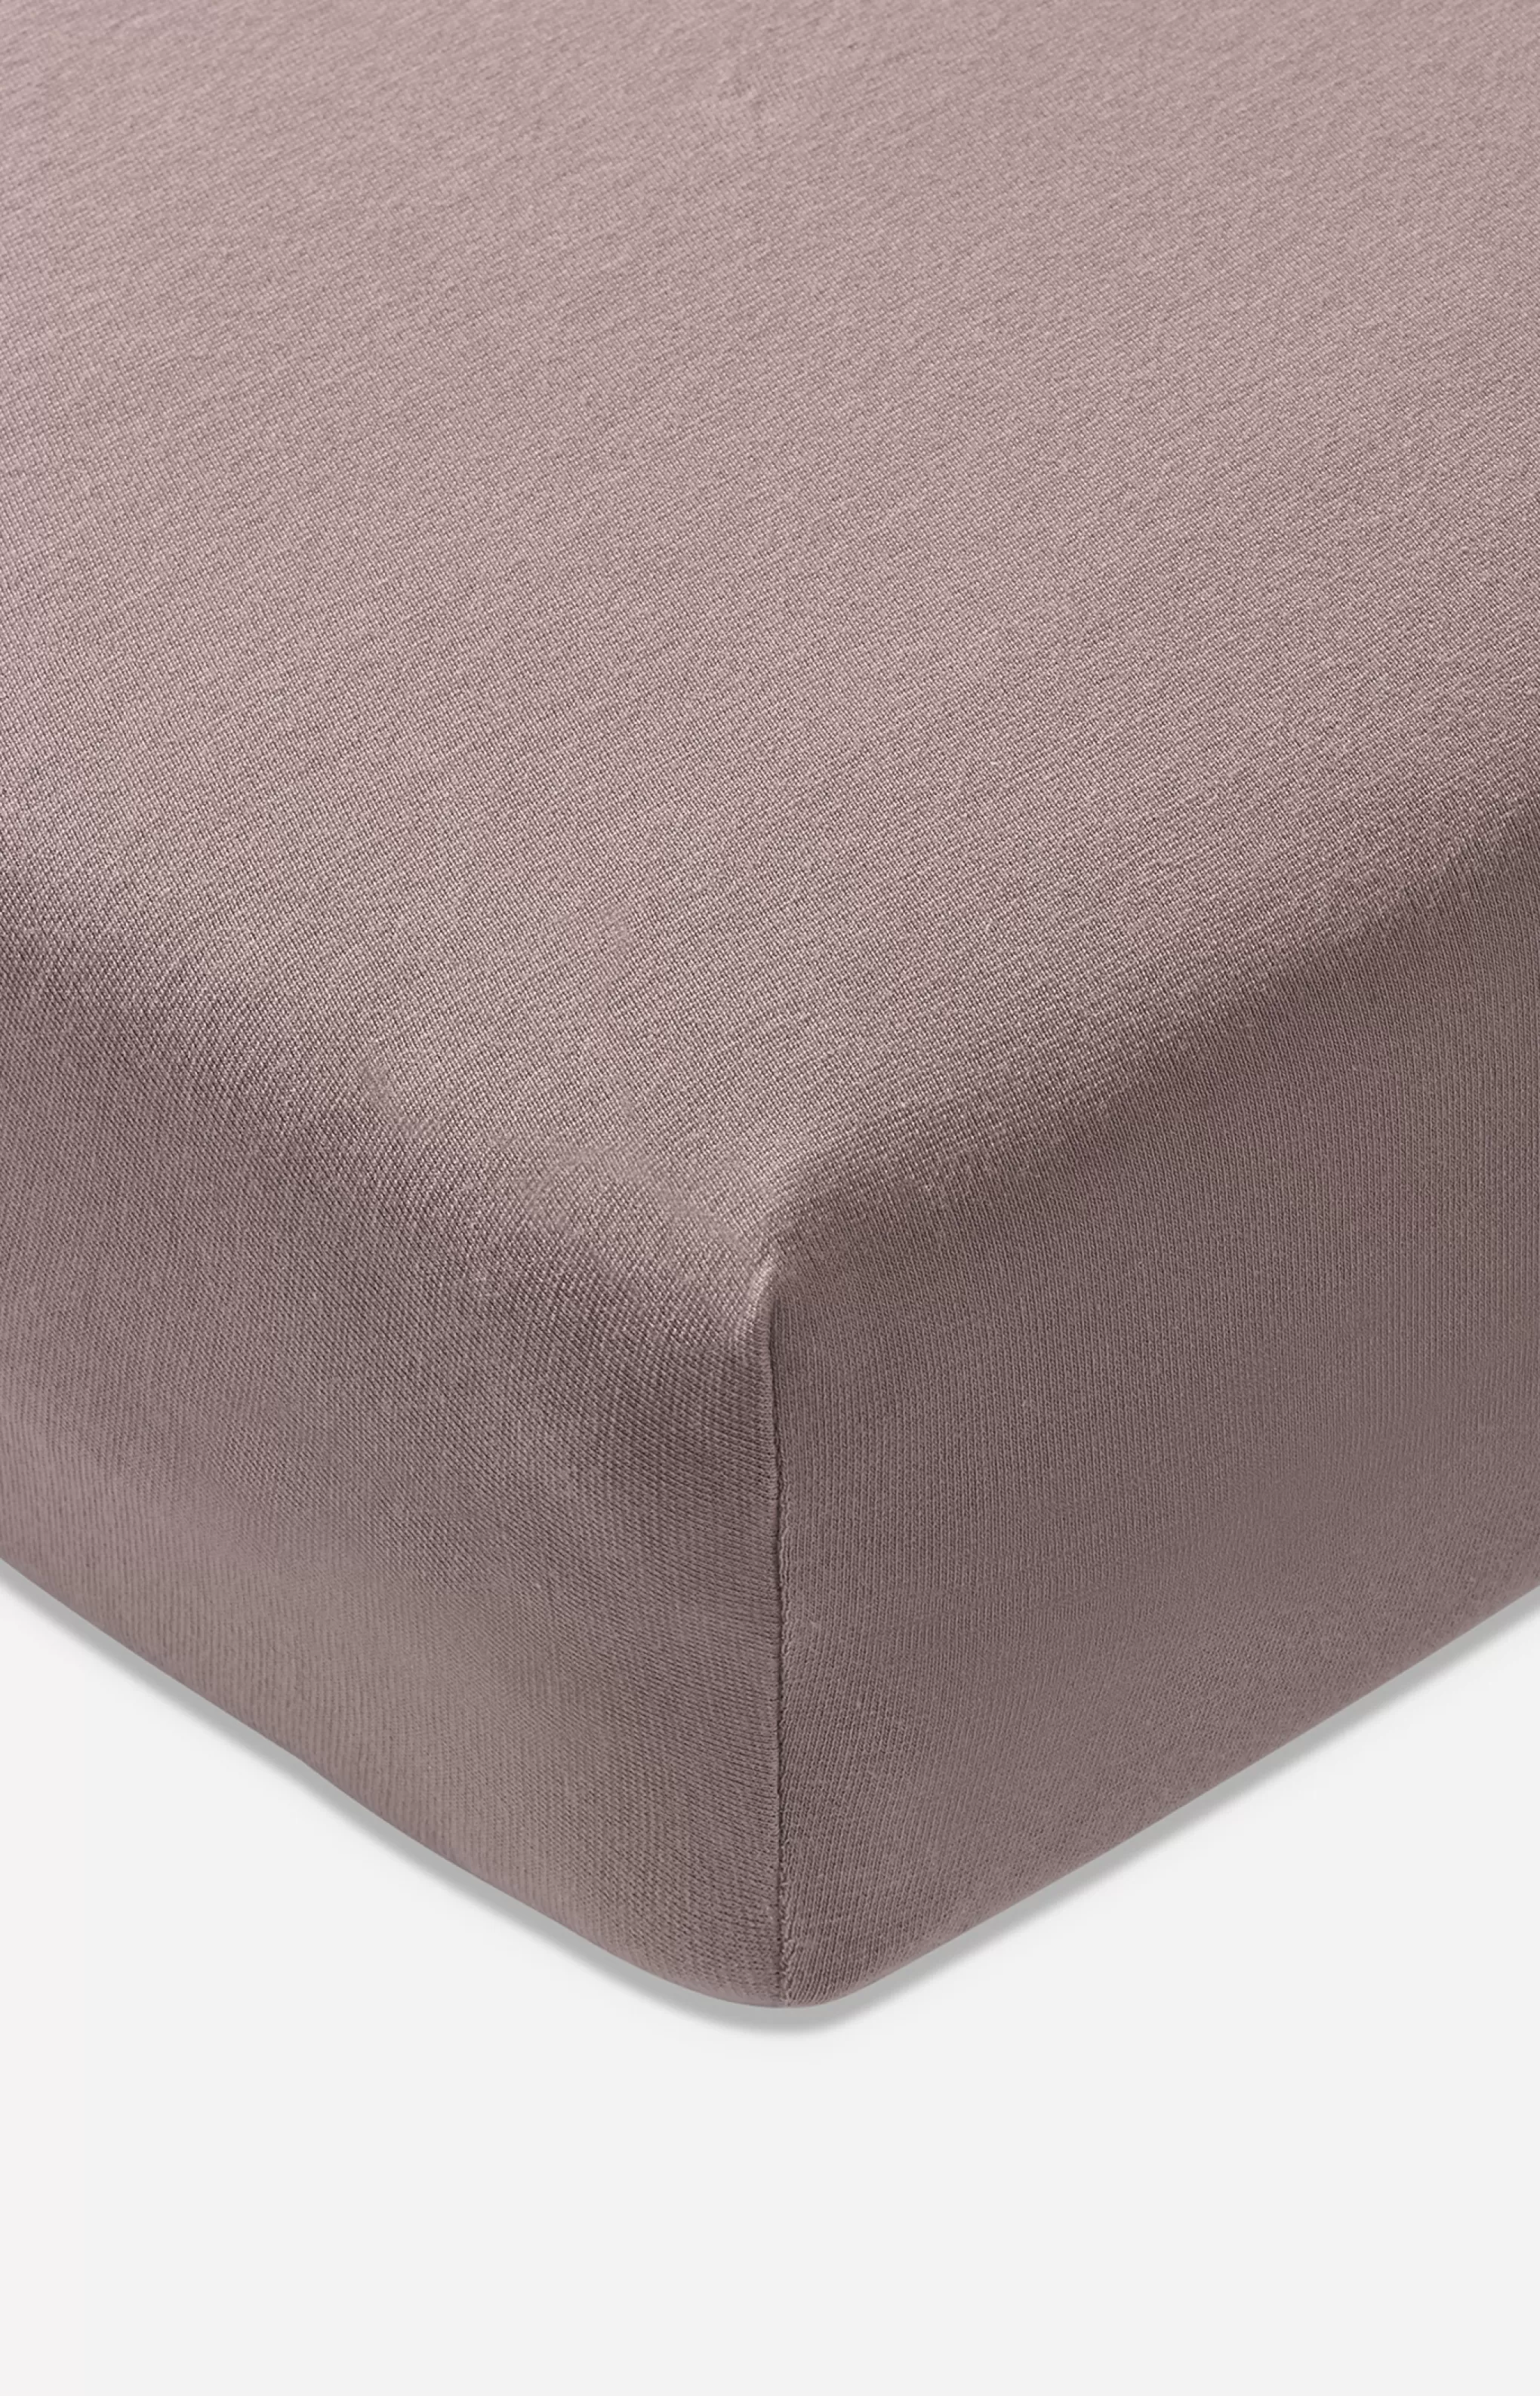 Fitted Sheets | Discover Everything*JOOP Fitted Sheets | Discover Everything Fitted sheets in